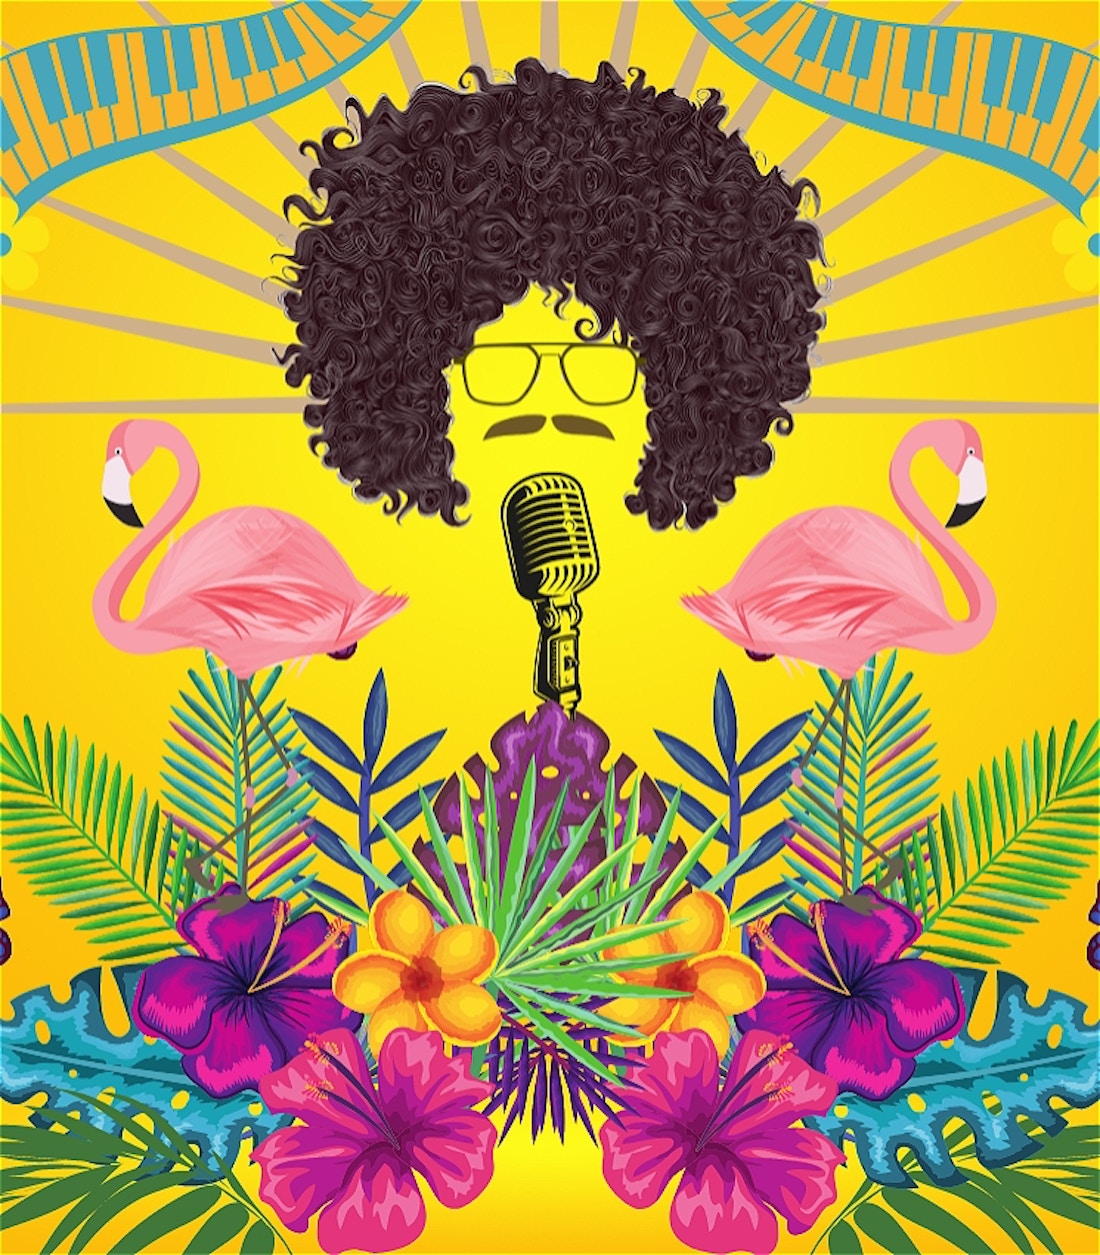 Cartoon depiction of 'Weird Al' Yankovic surrounded by Hawaiian flora, a microphone and piano, presented as an almost religious icon.